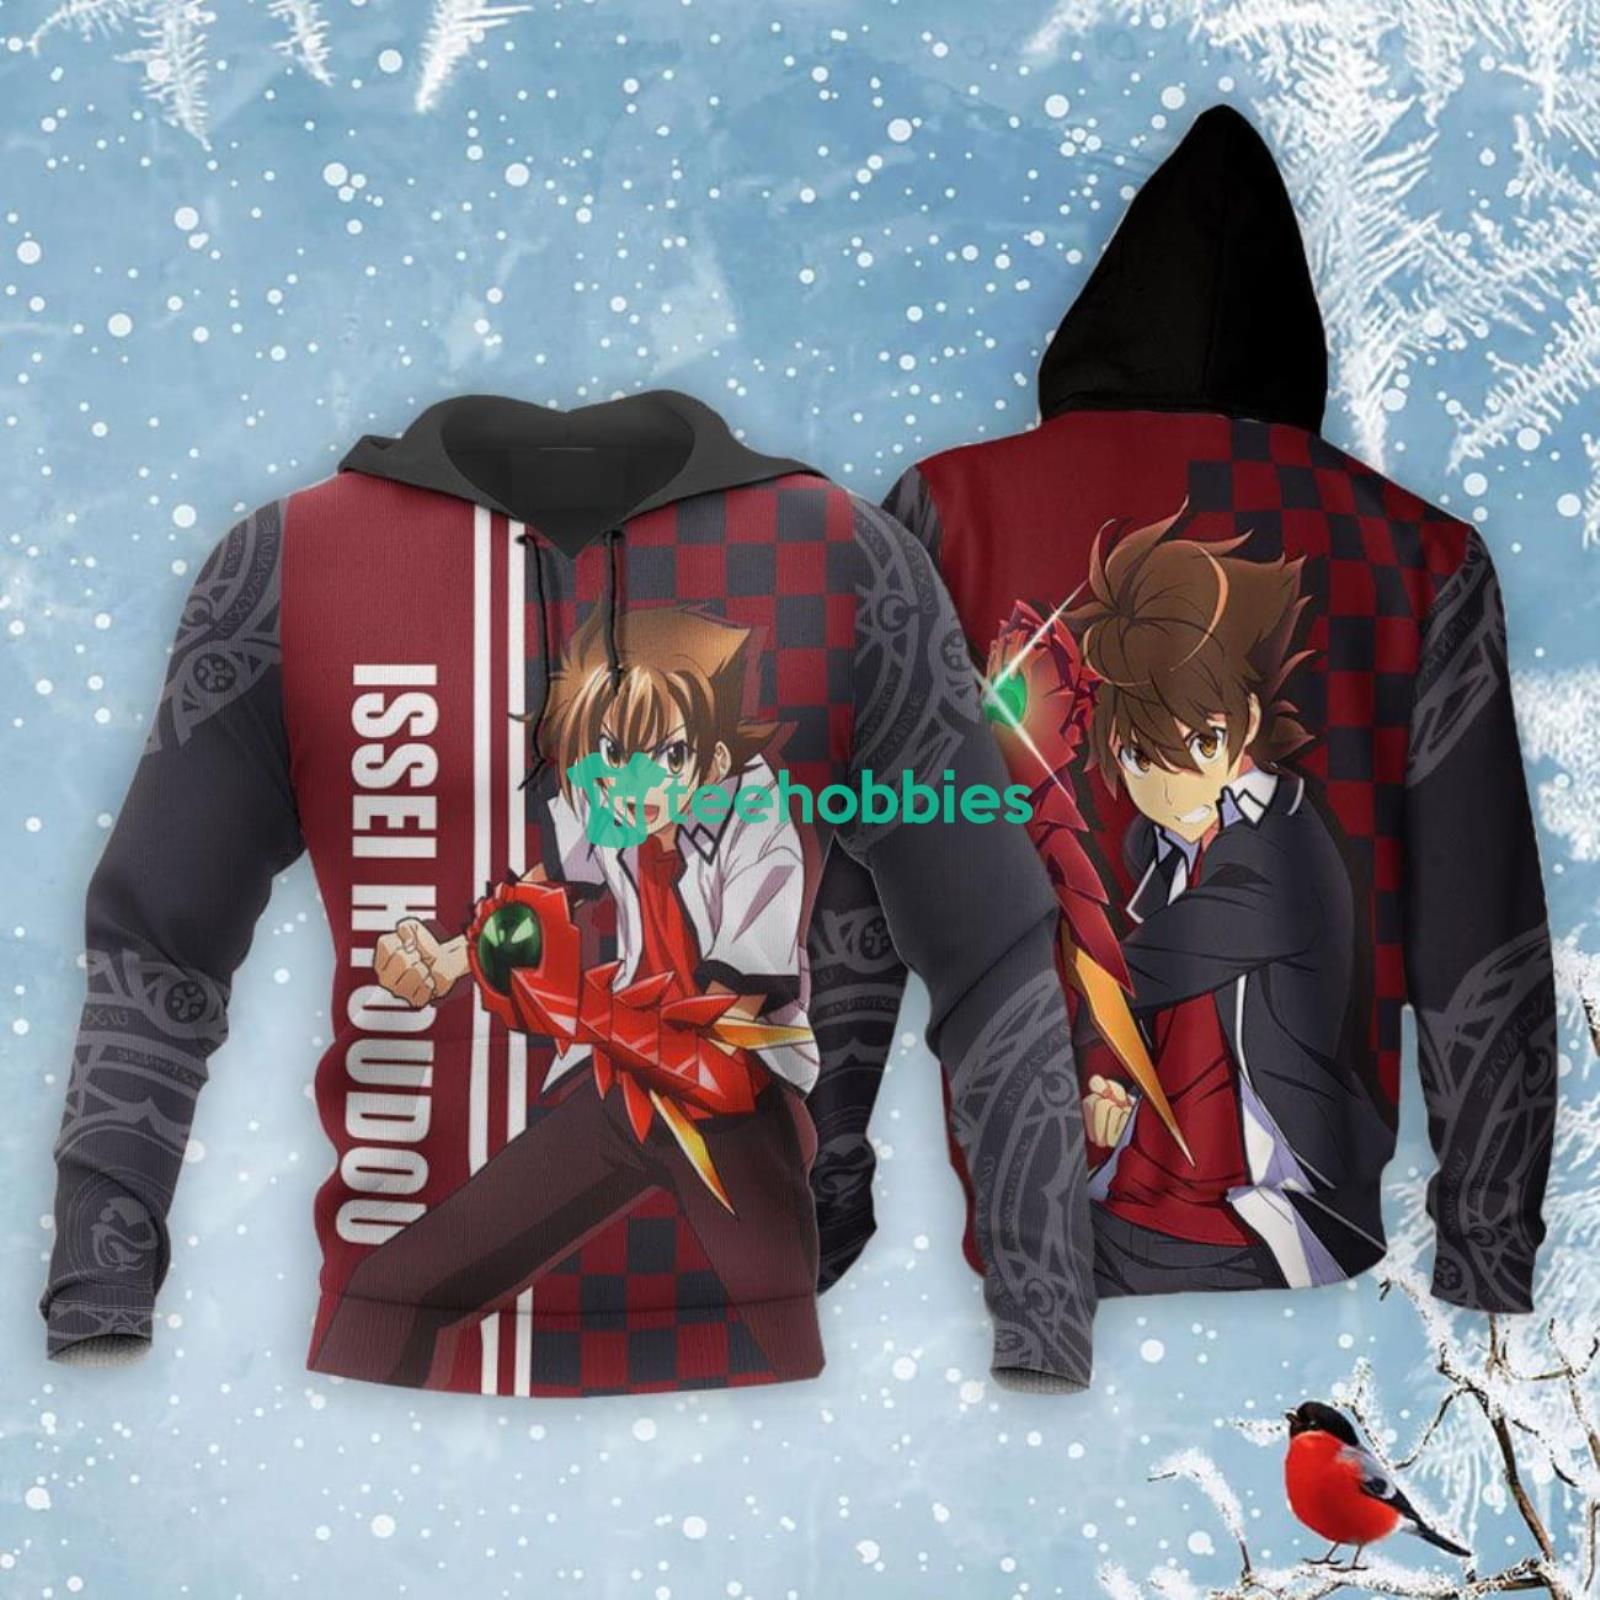 High School DXD Issei Hyoudou All Over Printed 3D Shirt Anime Fans Product Photo 3 Product photo 2